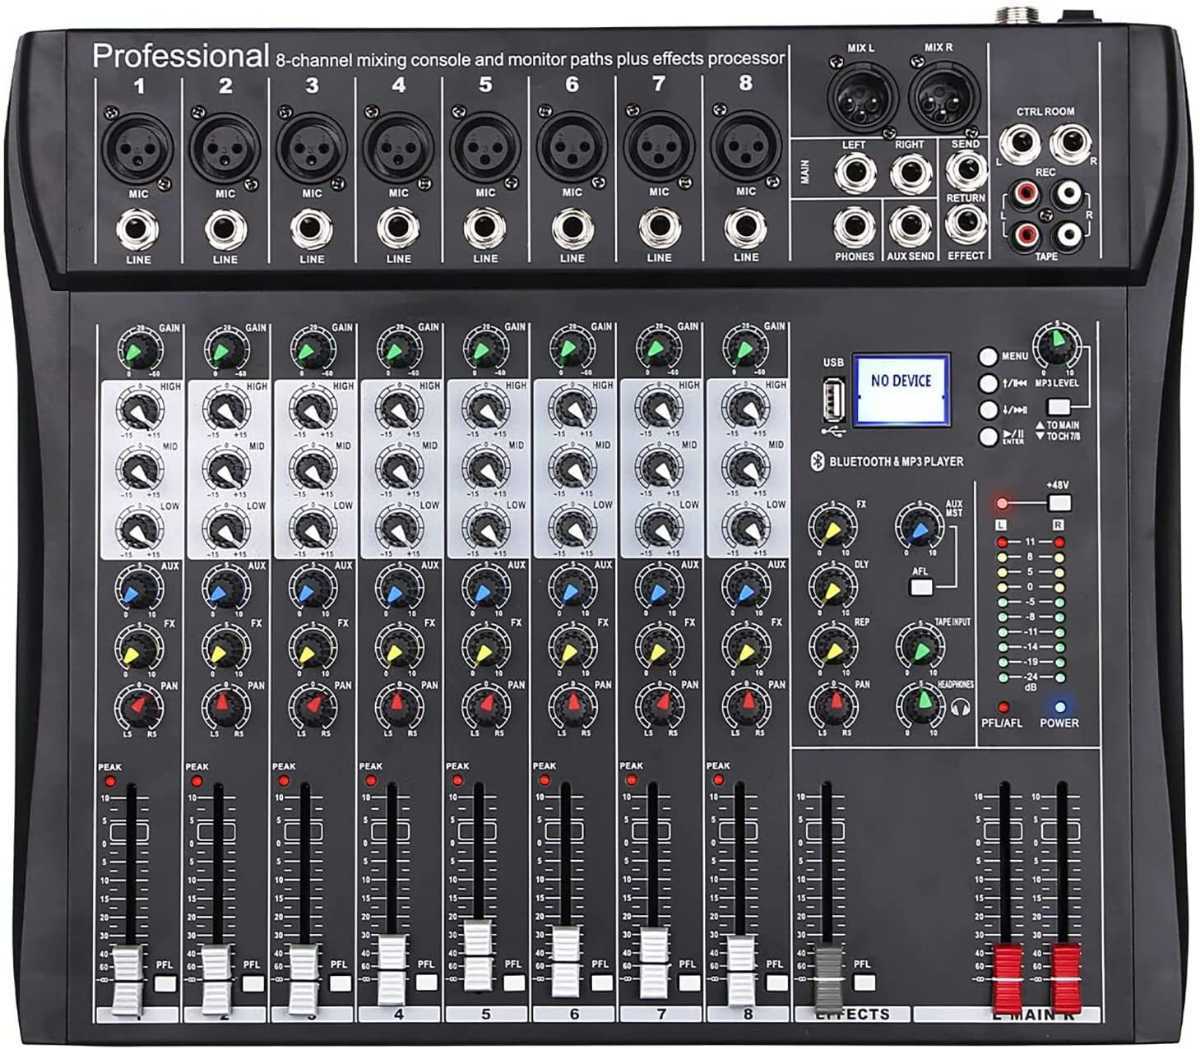 Sound Mixer Professional Sound Input Mixer 7-Channel Mixing Console with a Sound Card Bluetooth Audio DJ Mixer for Music Bar US Plug 110-240V 